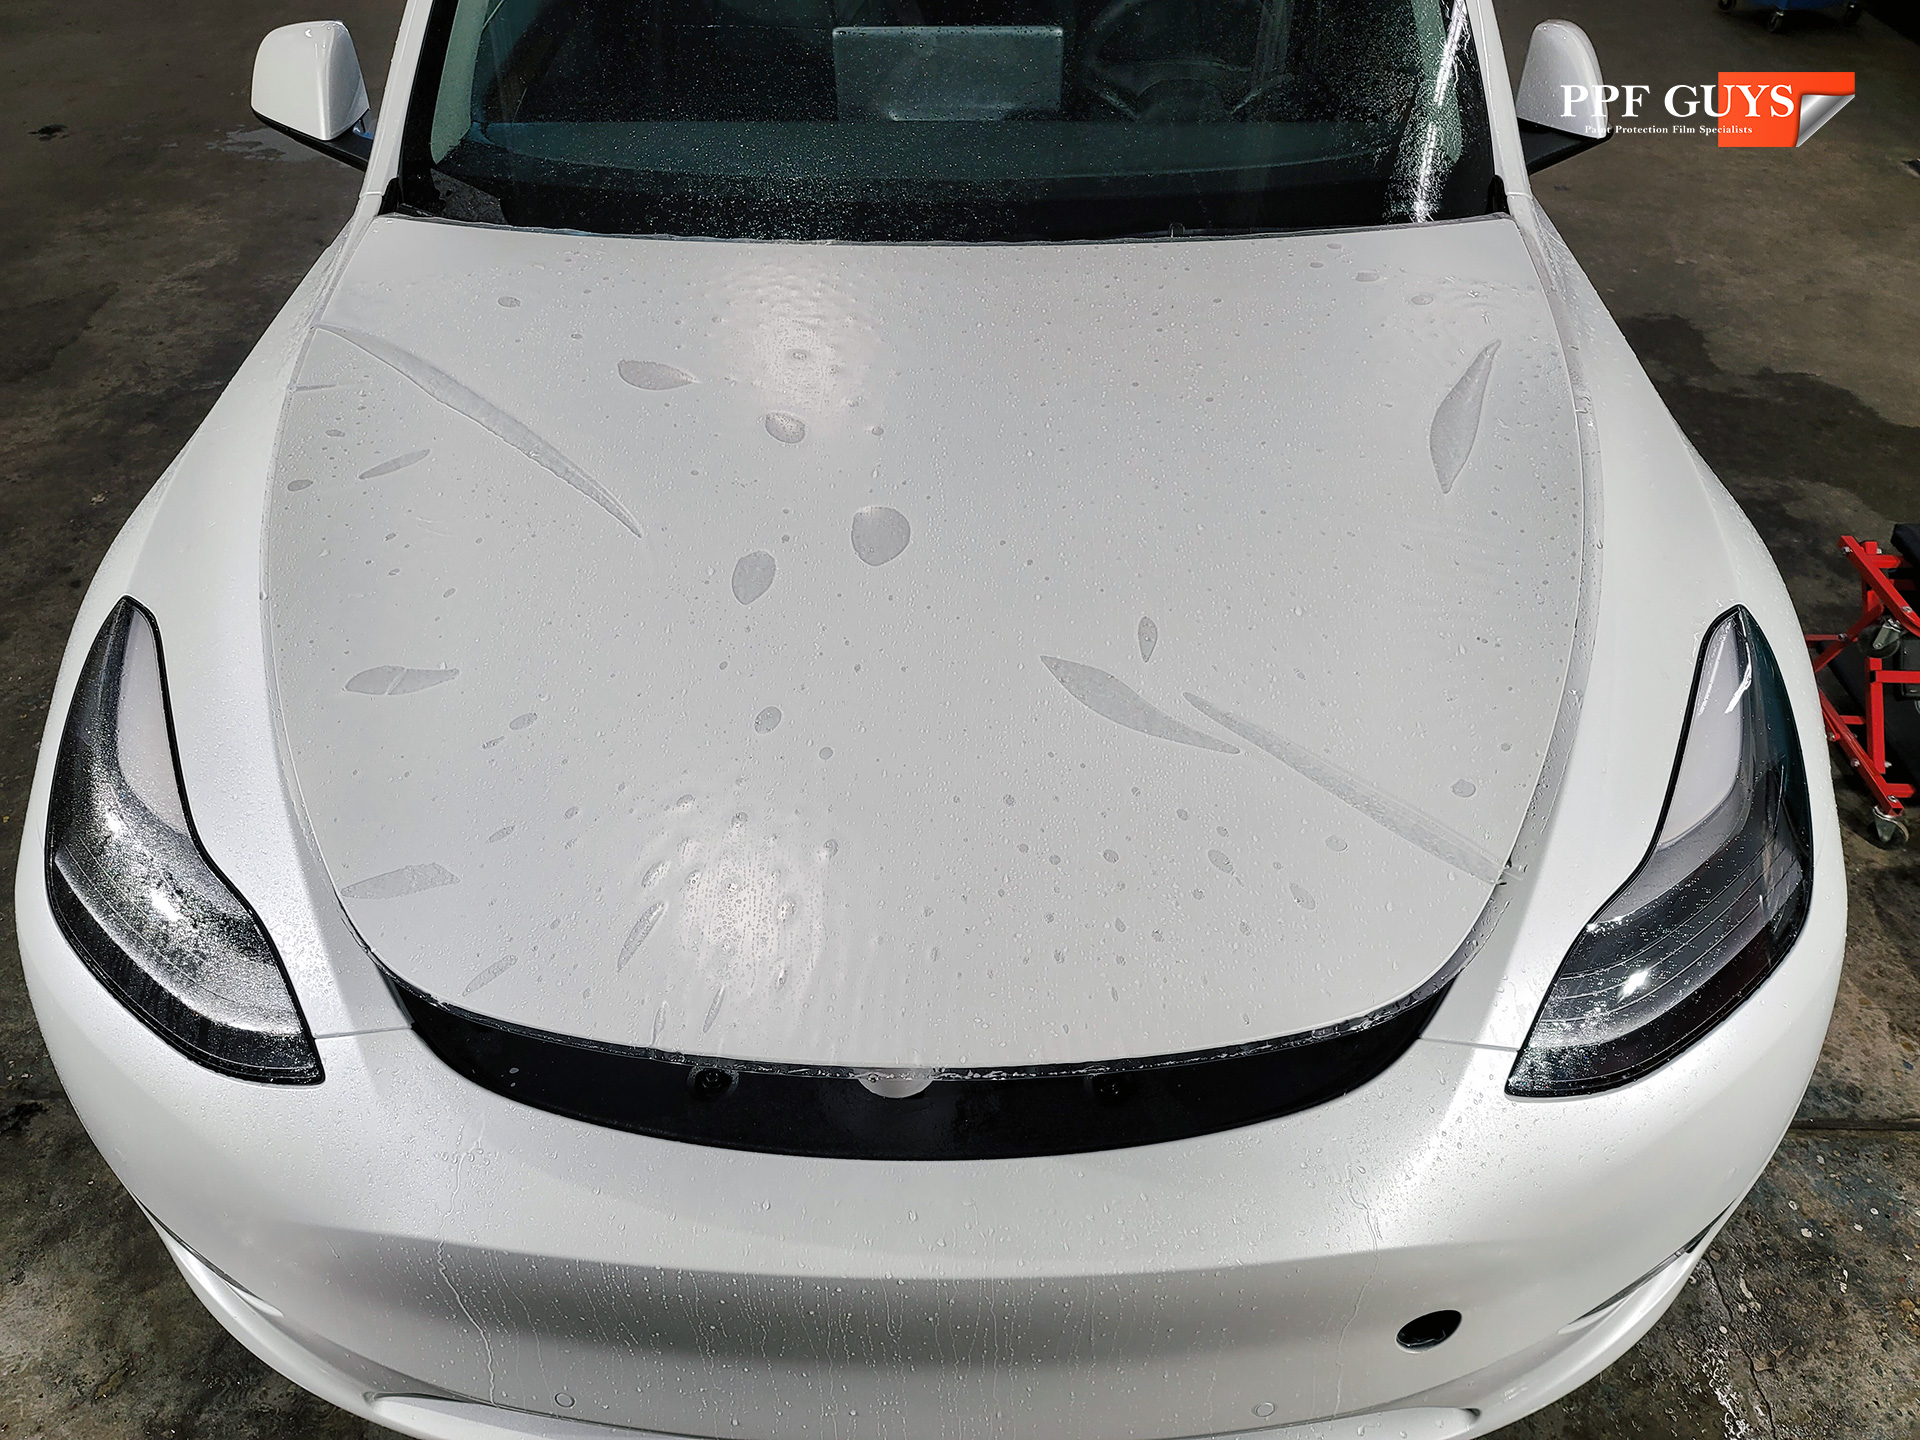 PPF Guys Model Y White Xpel Stealth, ceramic, painted emblems (14).jpg